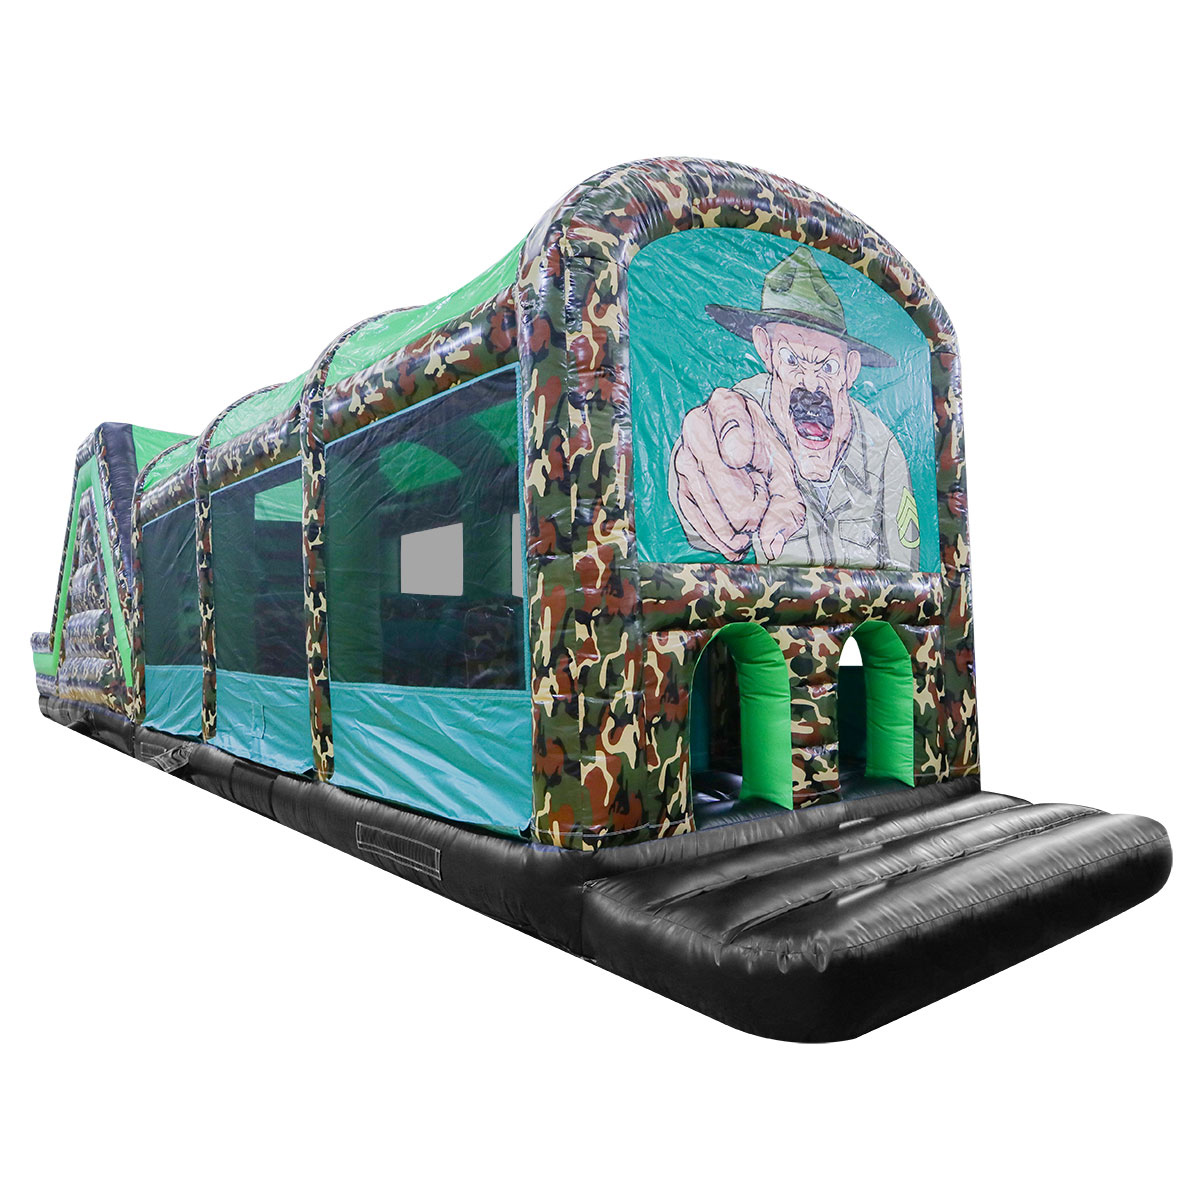 New Inflatable Military Obstacles courseYGO64